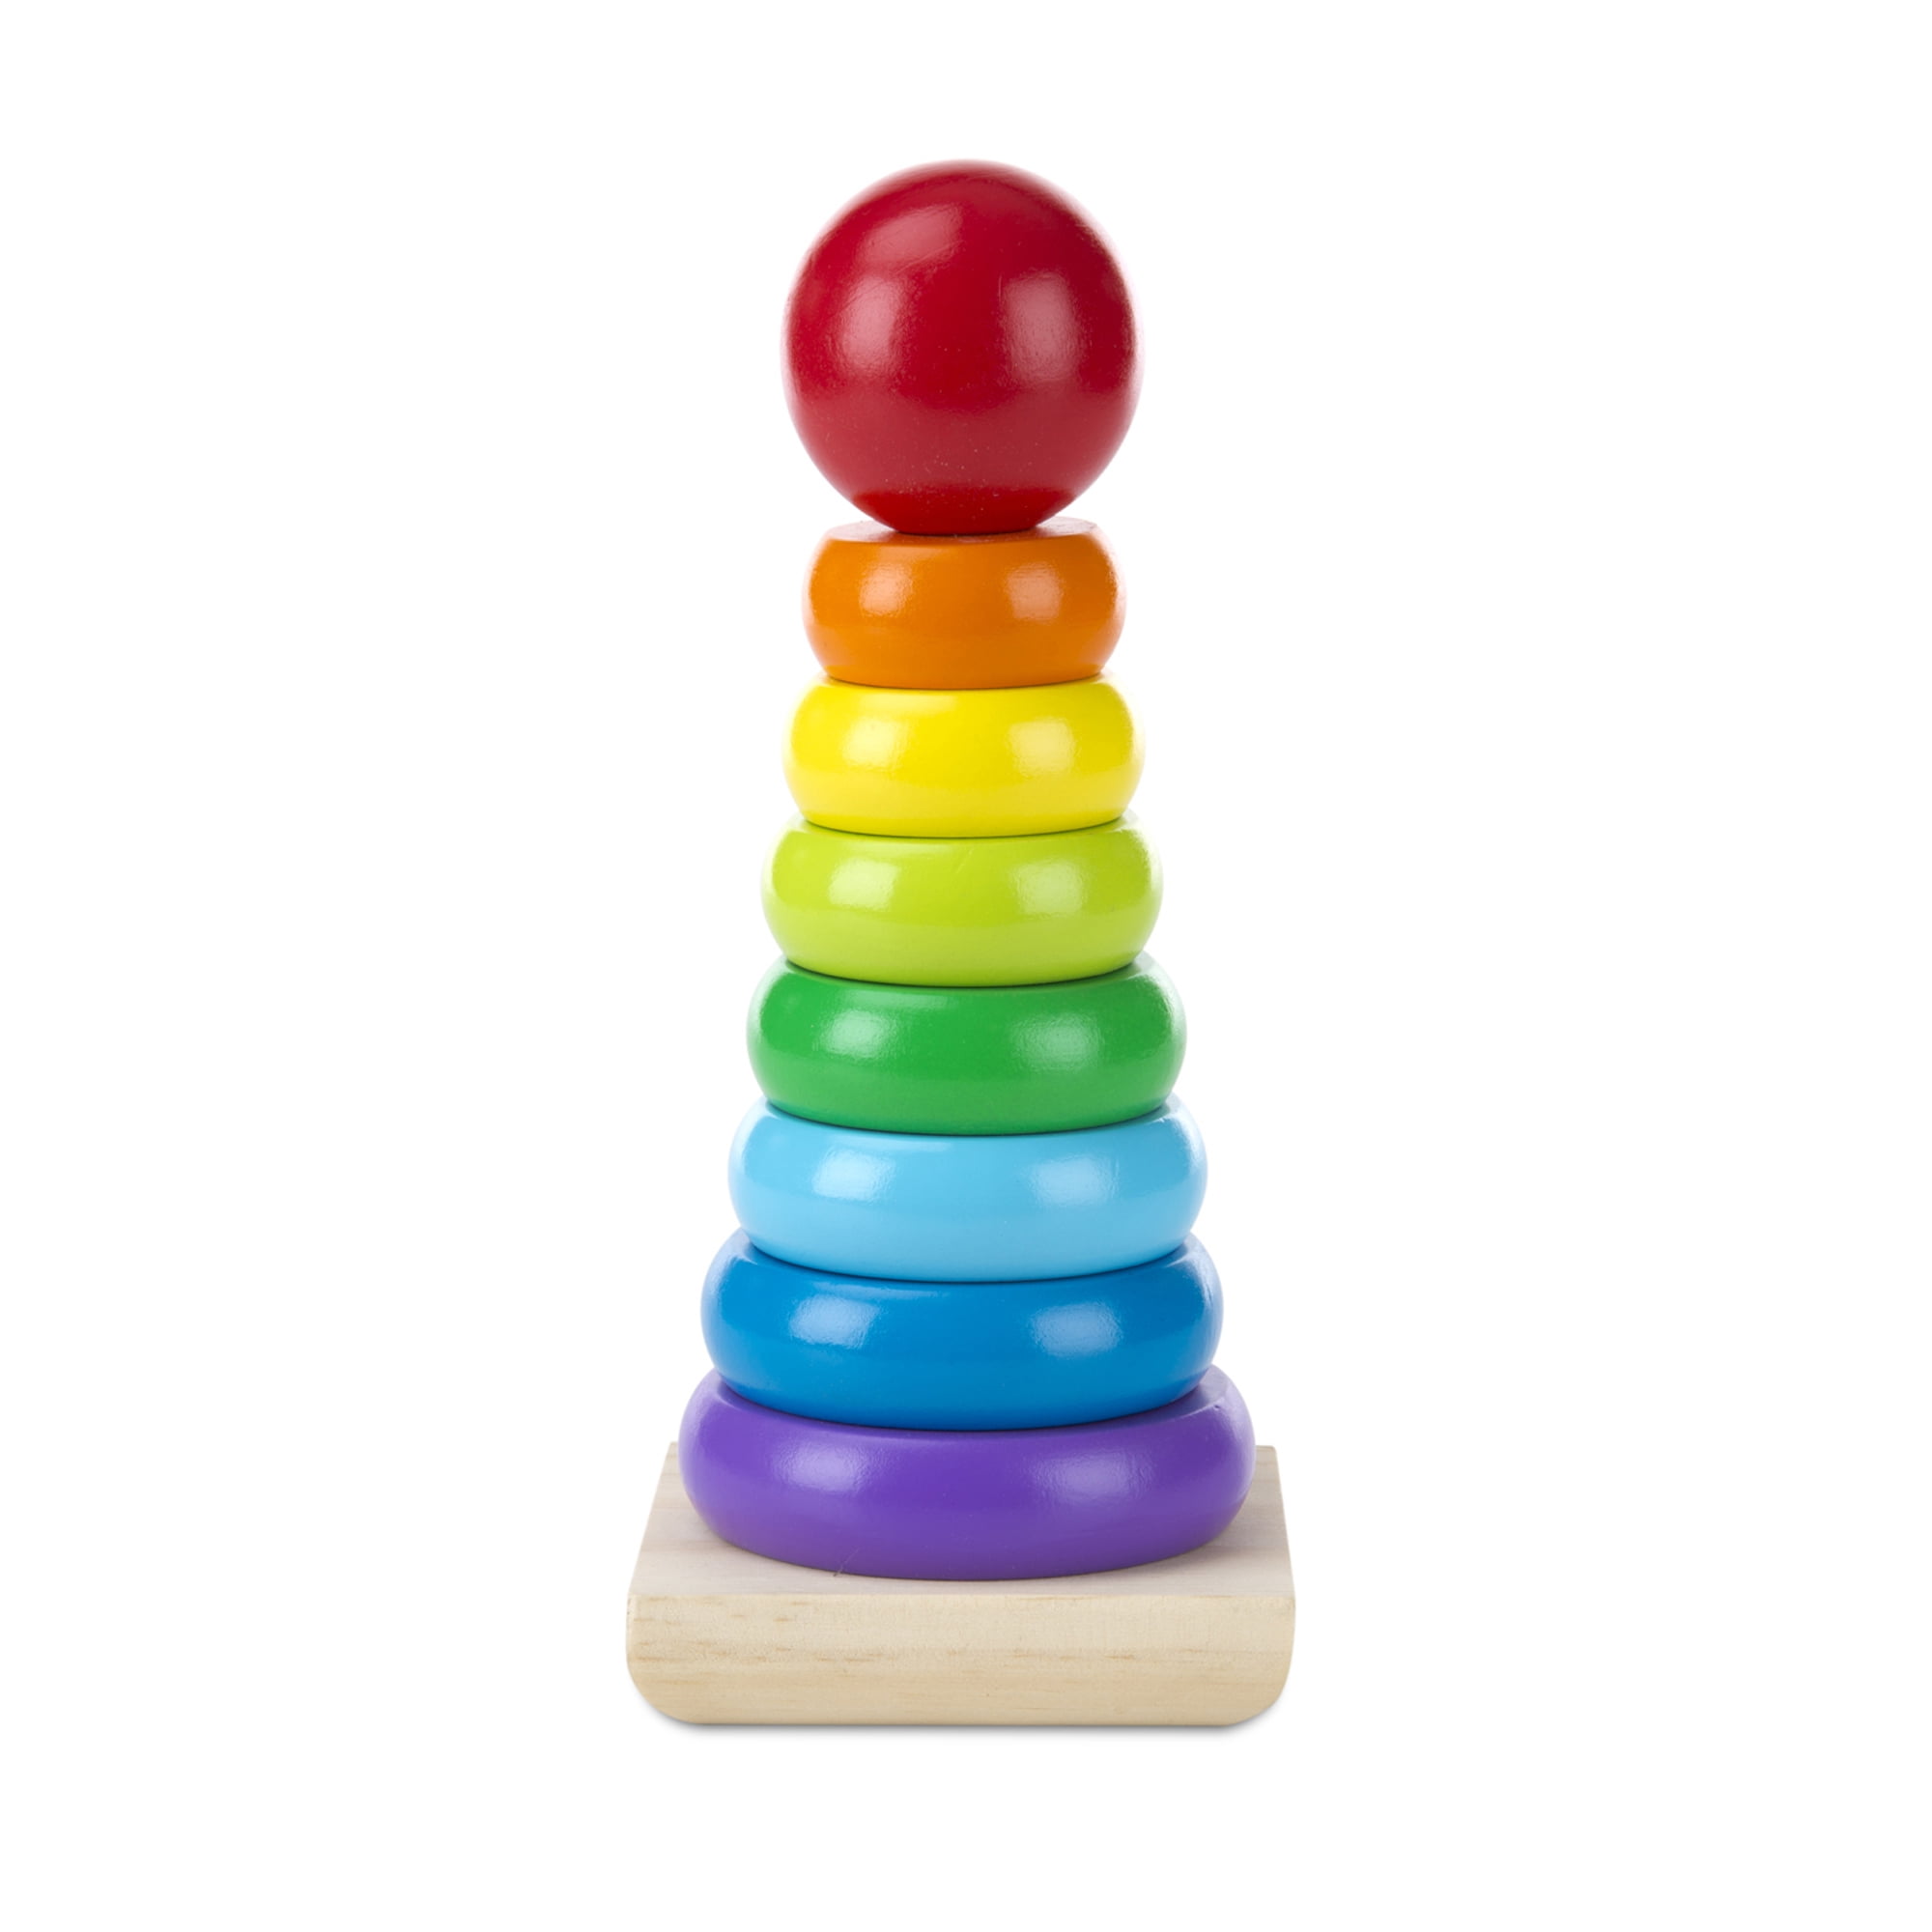 Melissa & Doug Rainbow Stacker Wooden Ring Educational Toy, 18+ months